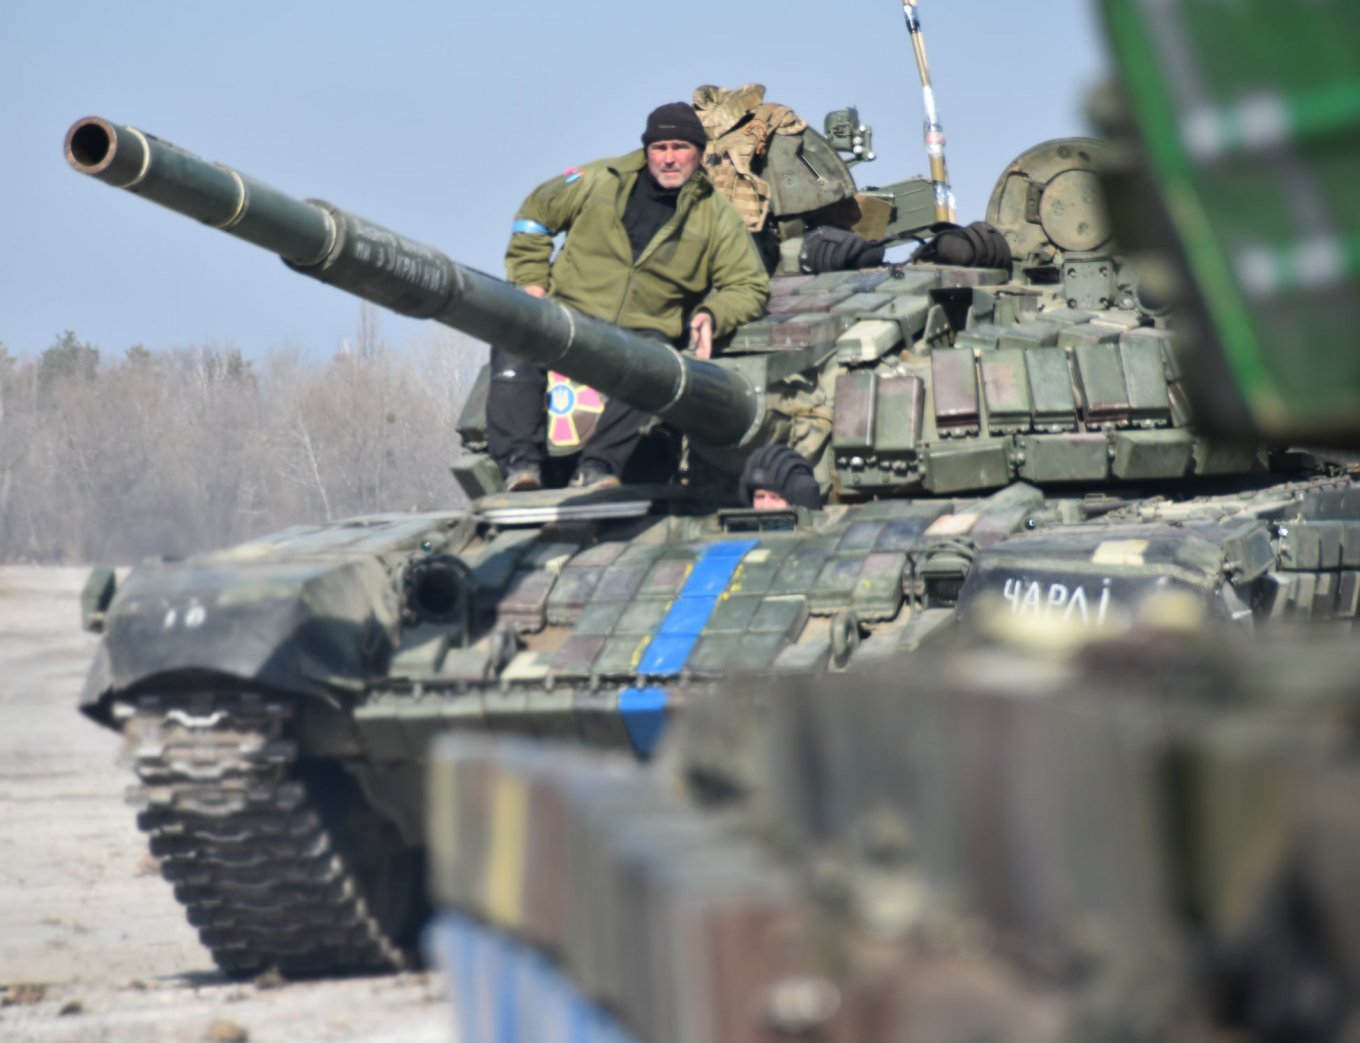 Russians Lose 5 of Their Tanks Per 1 Tank of Ukraine’s Armed Forces: Zelensky Stressed the Importance of Supplying Weapons, Defense Express